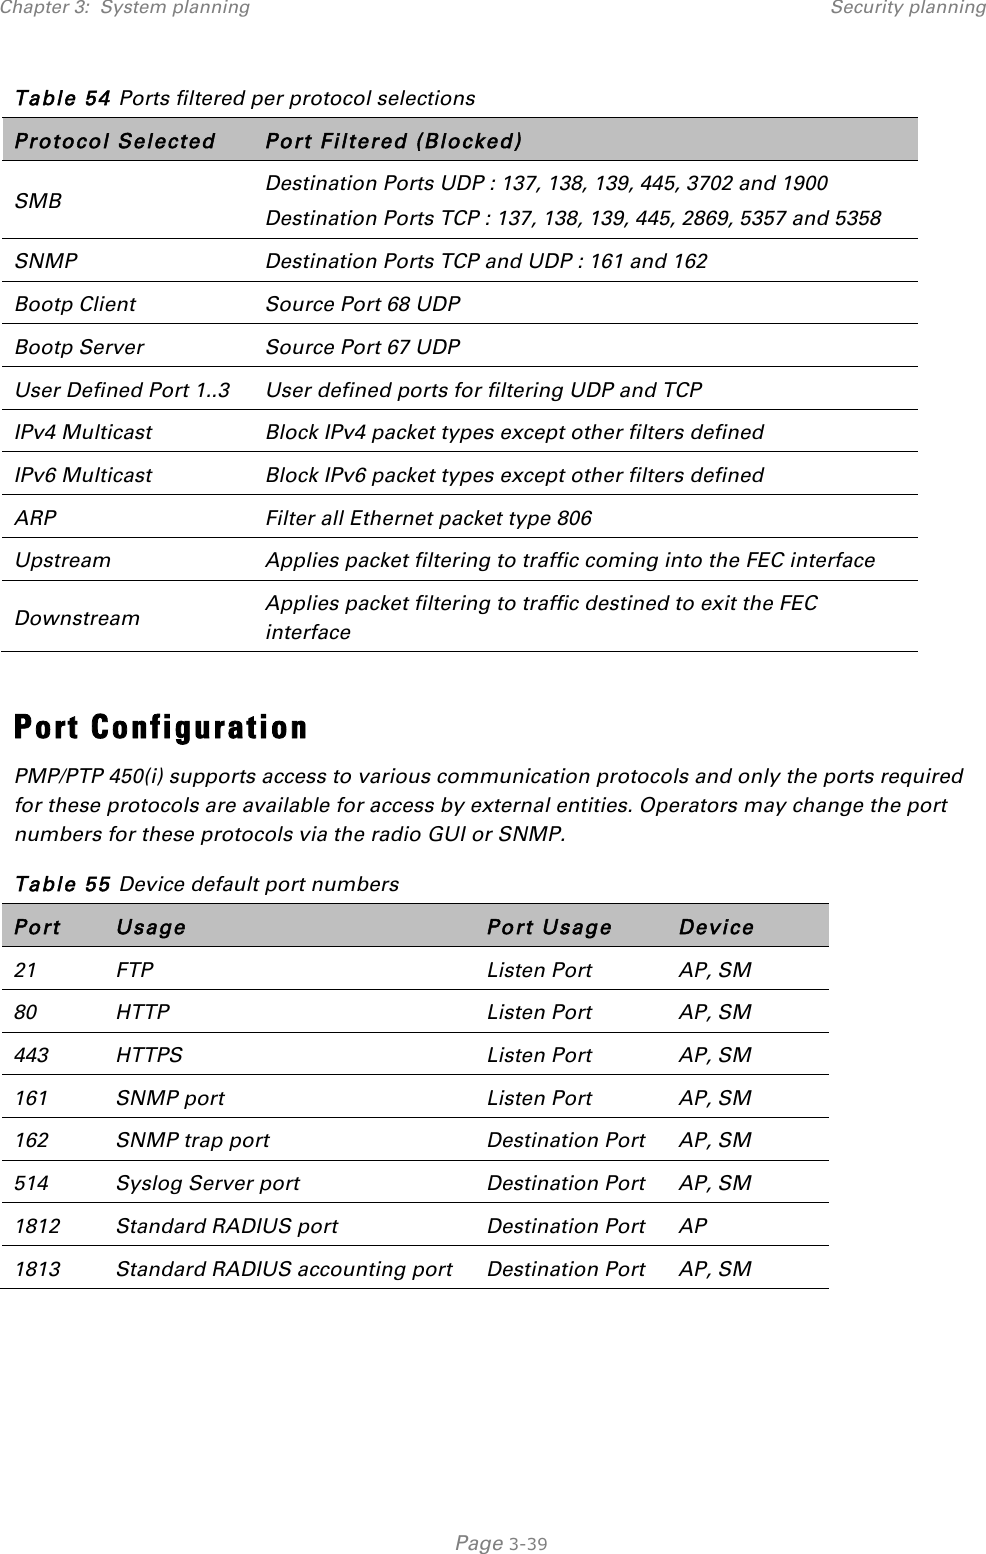 Chapter 3:  System planning Security planning   Page 3-39 Table 54 Ports filtered per protocol selections   Port Configuration PMP/PTP 450(i) supports access to various communication protocols and only the ports required for these protocols are available for access by external entities. Operators may change the port numbers for these protocols via the radio GUI or SNMP. Table 55 Device default port numbers Port Usage Port Usage Device 21 FTP Listen Port AP, SM 80 HTTP Listen Port AP, SM 443 HTTPS Listen Port AP, SM 161 SNMP port Listen Port AP, SM 162 SNMP trap port Destination Port AP, SM 514 Syslog Server port Destination Port AP, SM 1812 Standard RADIUS port Destination Port AP 1813 Standard RADIUS accounting port Destination Port AP, SM    Protocol Selected Port Filtered (Blocked) SMB Destination Ports UDP : 137, 138, 139, 445, 3702 and 1900 Destination Ports TCP : 137, 138, 139, 445, 2869, 5357 and 5358 SNMP Destination Ports TCP and UDP : 161 and 162 Bootp Client Source Port 68 UDP Bootp Server Source Port 67 UDP User Defined Port 1..3 User defined ports for filtering UDP and TCP IPv4 Multicast Block IPv4 packet types except other filters defined IPv6 Multicast Block IPv6 packet types except other filters defined ARP Filter all Ethernet packet type 806 Upstream  Applies packet filtering to traffic coming into the FEC interface Downstream Applies packet filtering to traffic destined to exit the FEC interface 